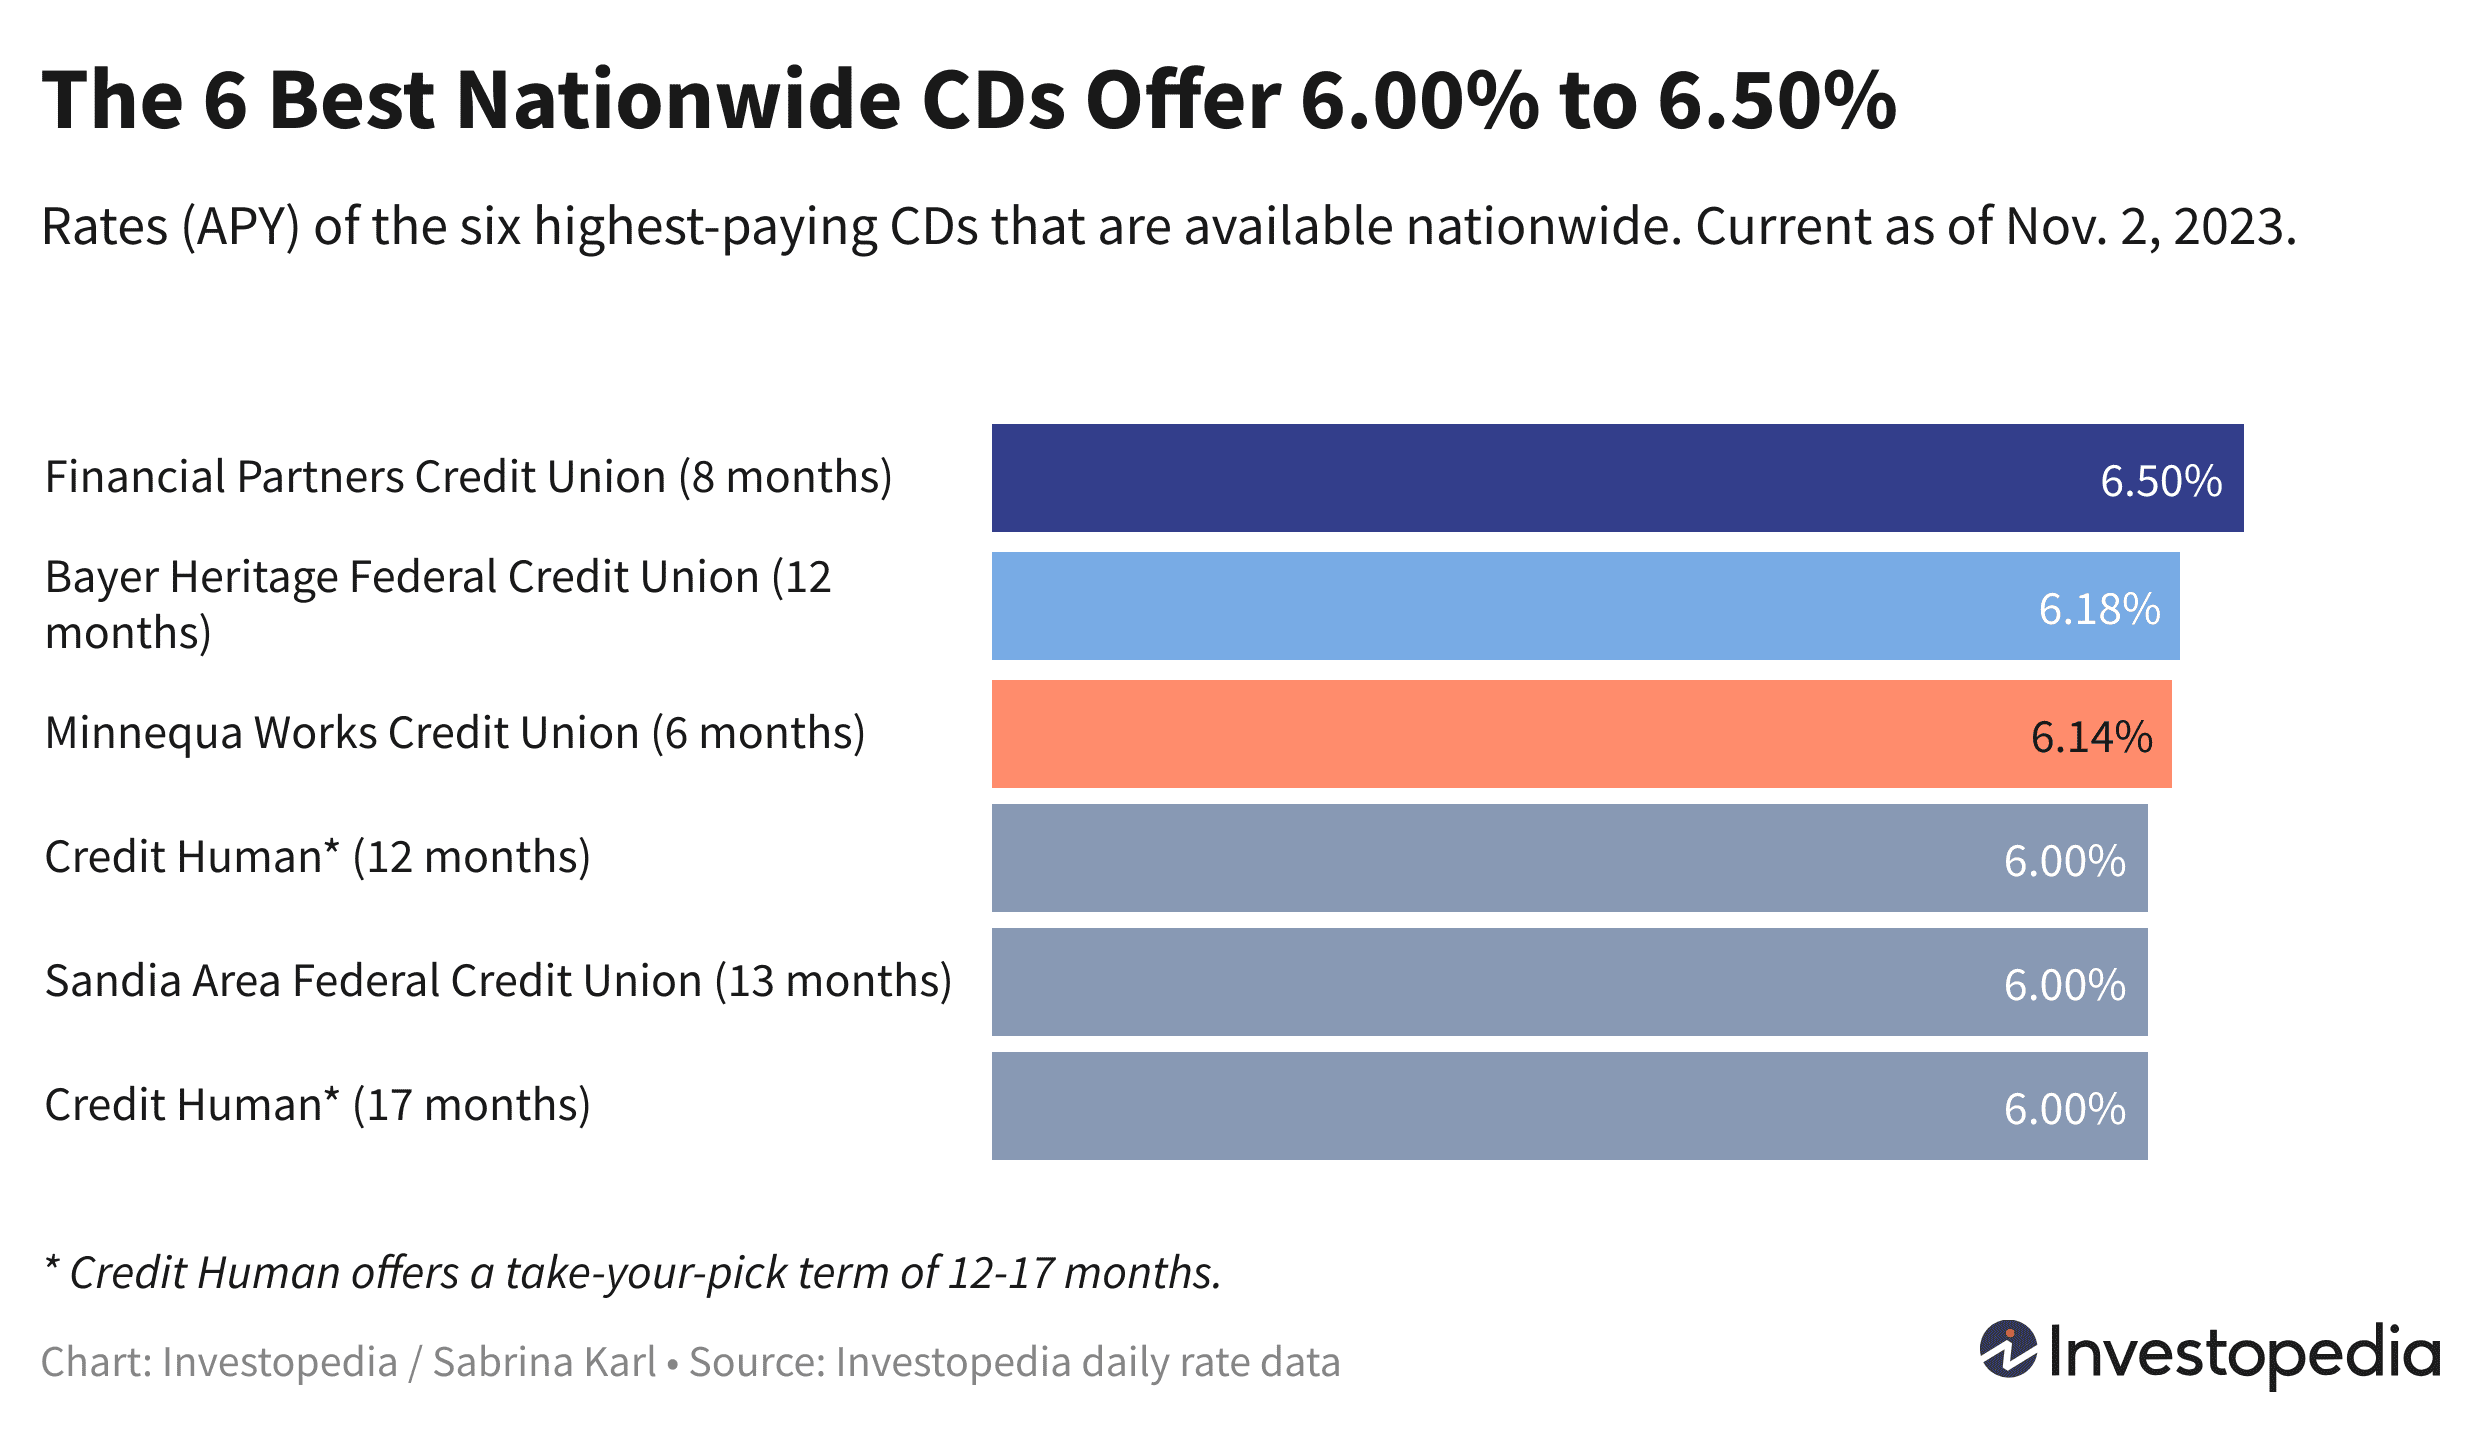 Bar graph showing the 6 leading CD rates, which range from 6.00% to 6.50% APY